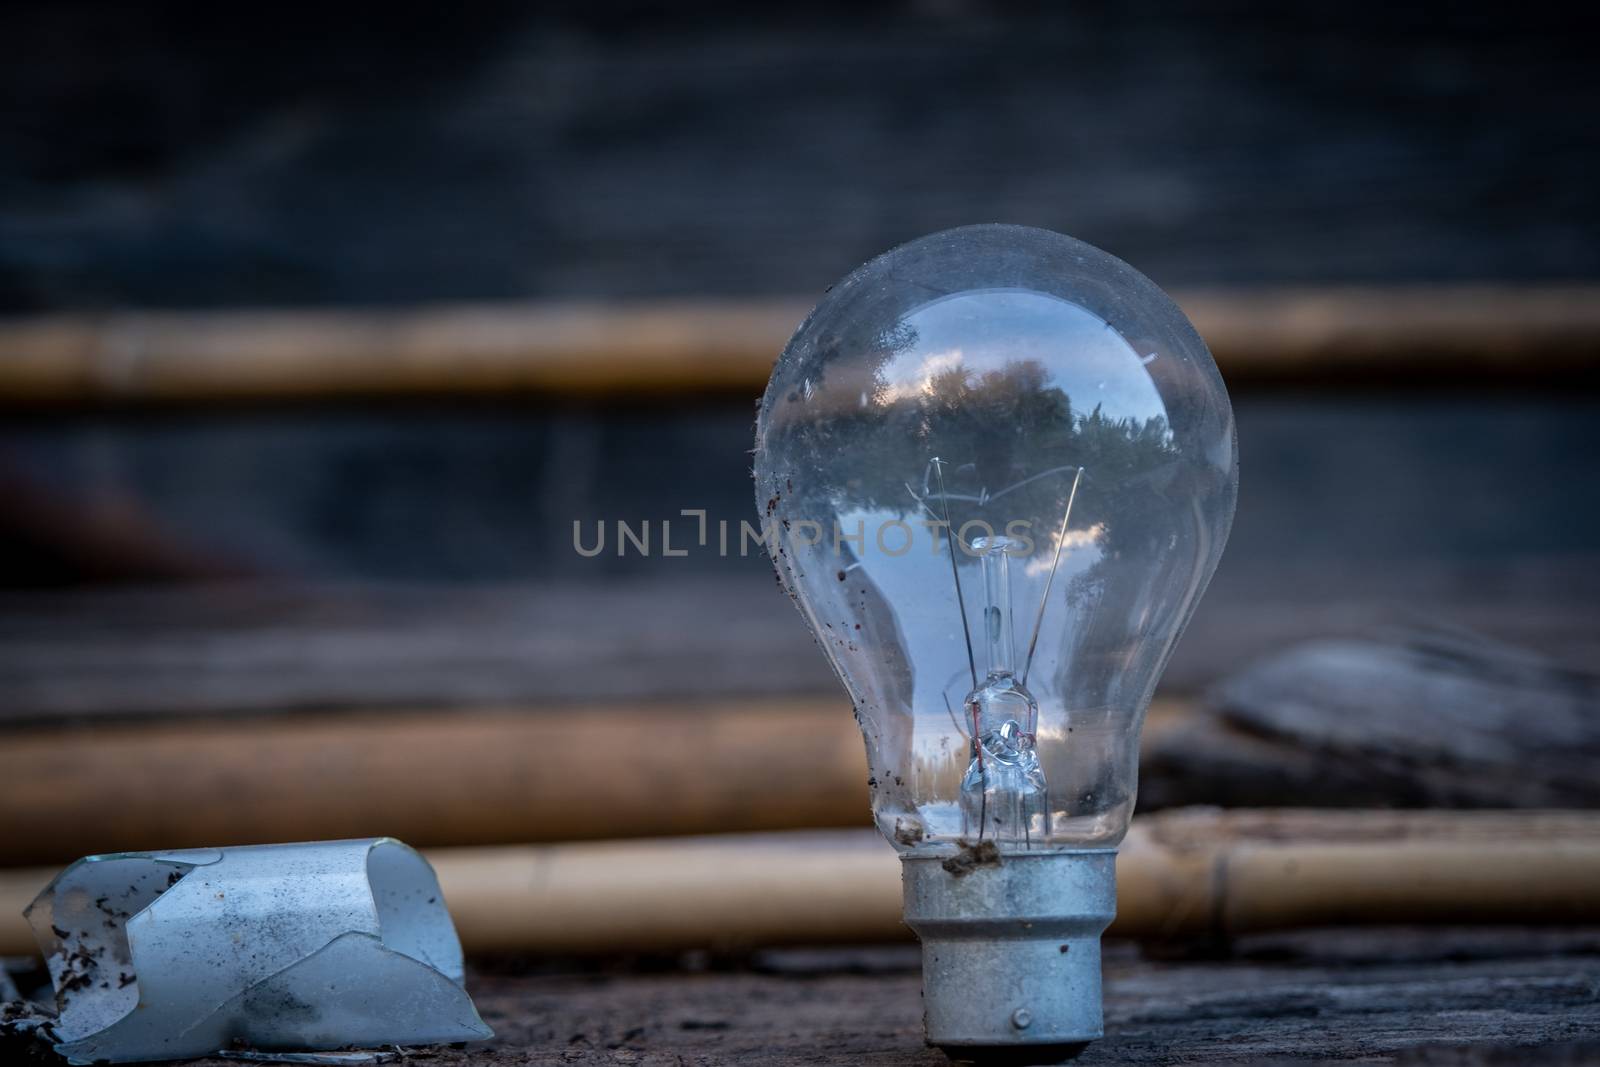 Dirty Old and unused Light Bulb with blur background by peerapixs